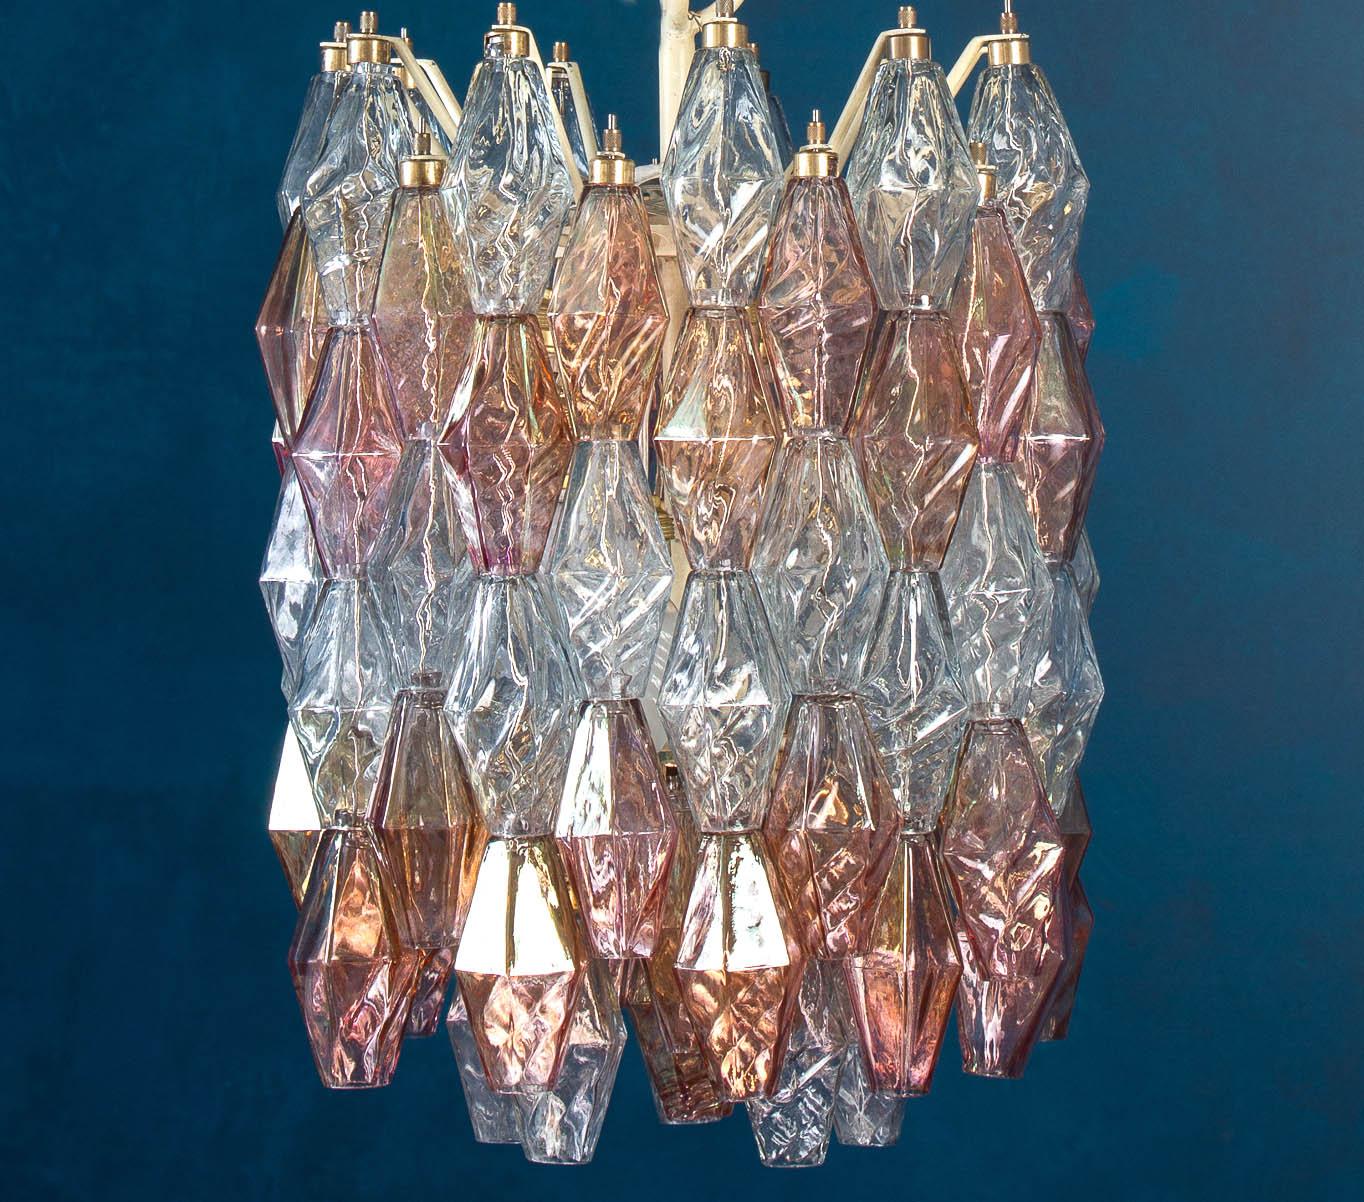 Pair of Pink and Light Blu Poliedri Chandelier C. Scarpa Venini Variation, 1970' For Sale 5